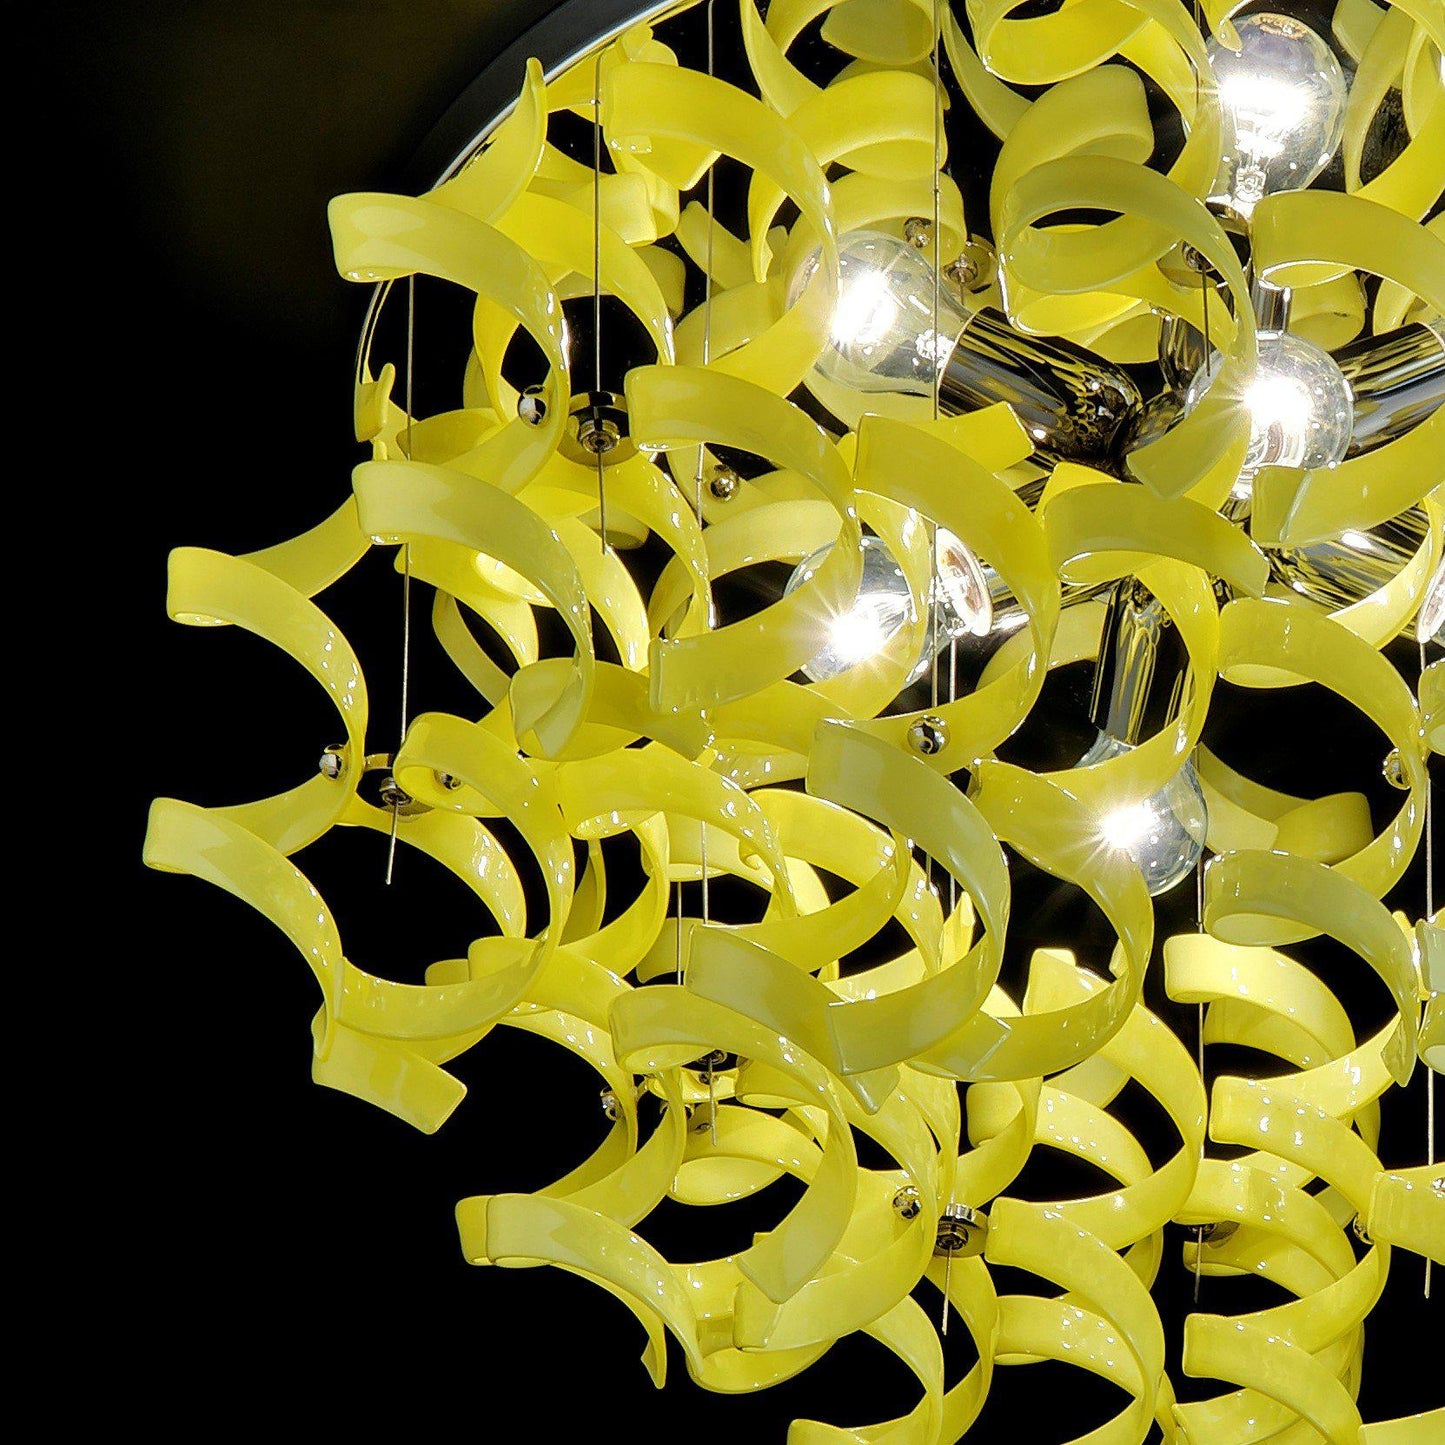 Abstract Glass Ribbon Circular Floor Standing Light with 3 Centre Cluster Lamps 40cm diameter-Chrome-Tuscany Yellow-Distinct Designs (London) Ltd